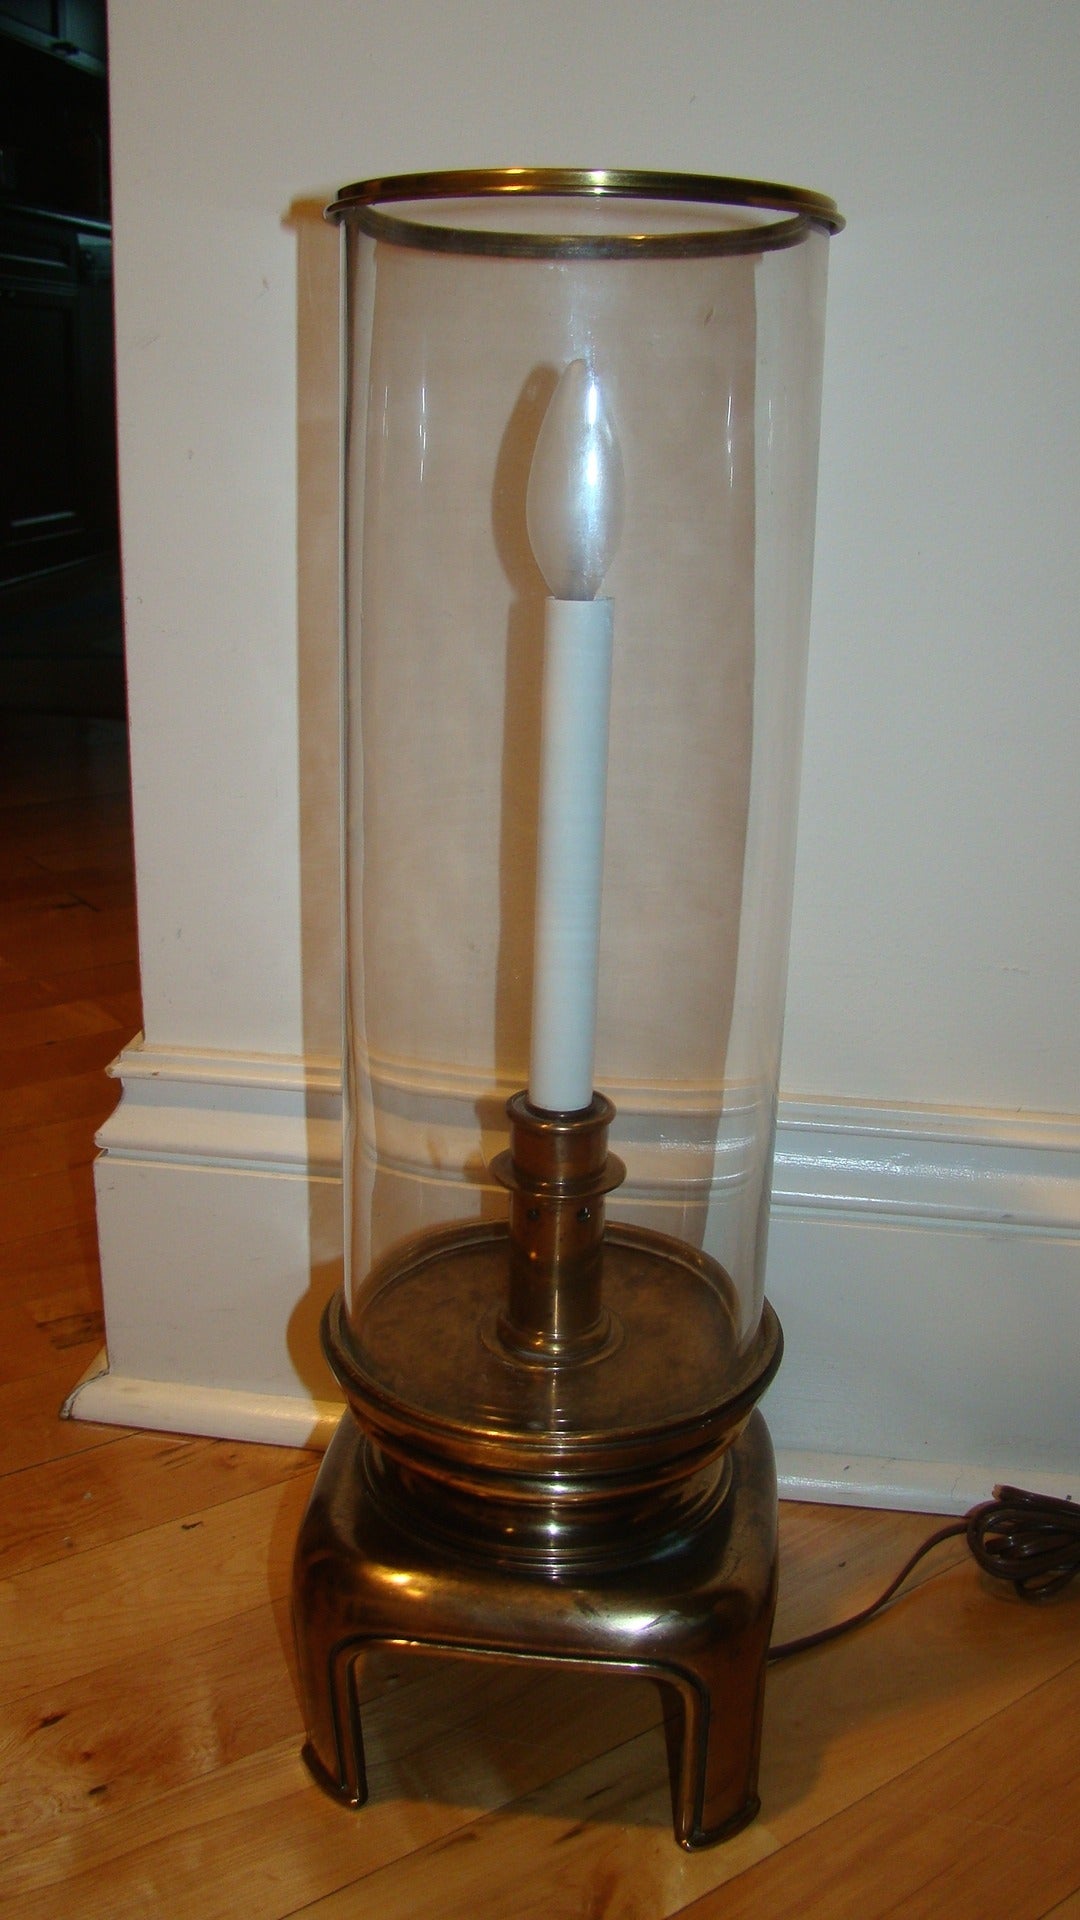 Terrific sculptural brass and glass hurricane style table lamp by either Stiffel or Chapman. The lamp is comprised of a heavy sculptural brass base with removable glass tube shade. Truly a beautiful design in person.